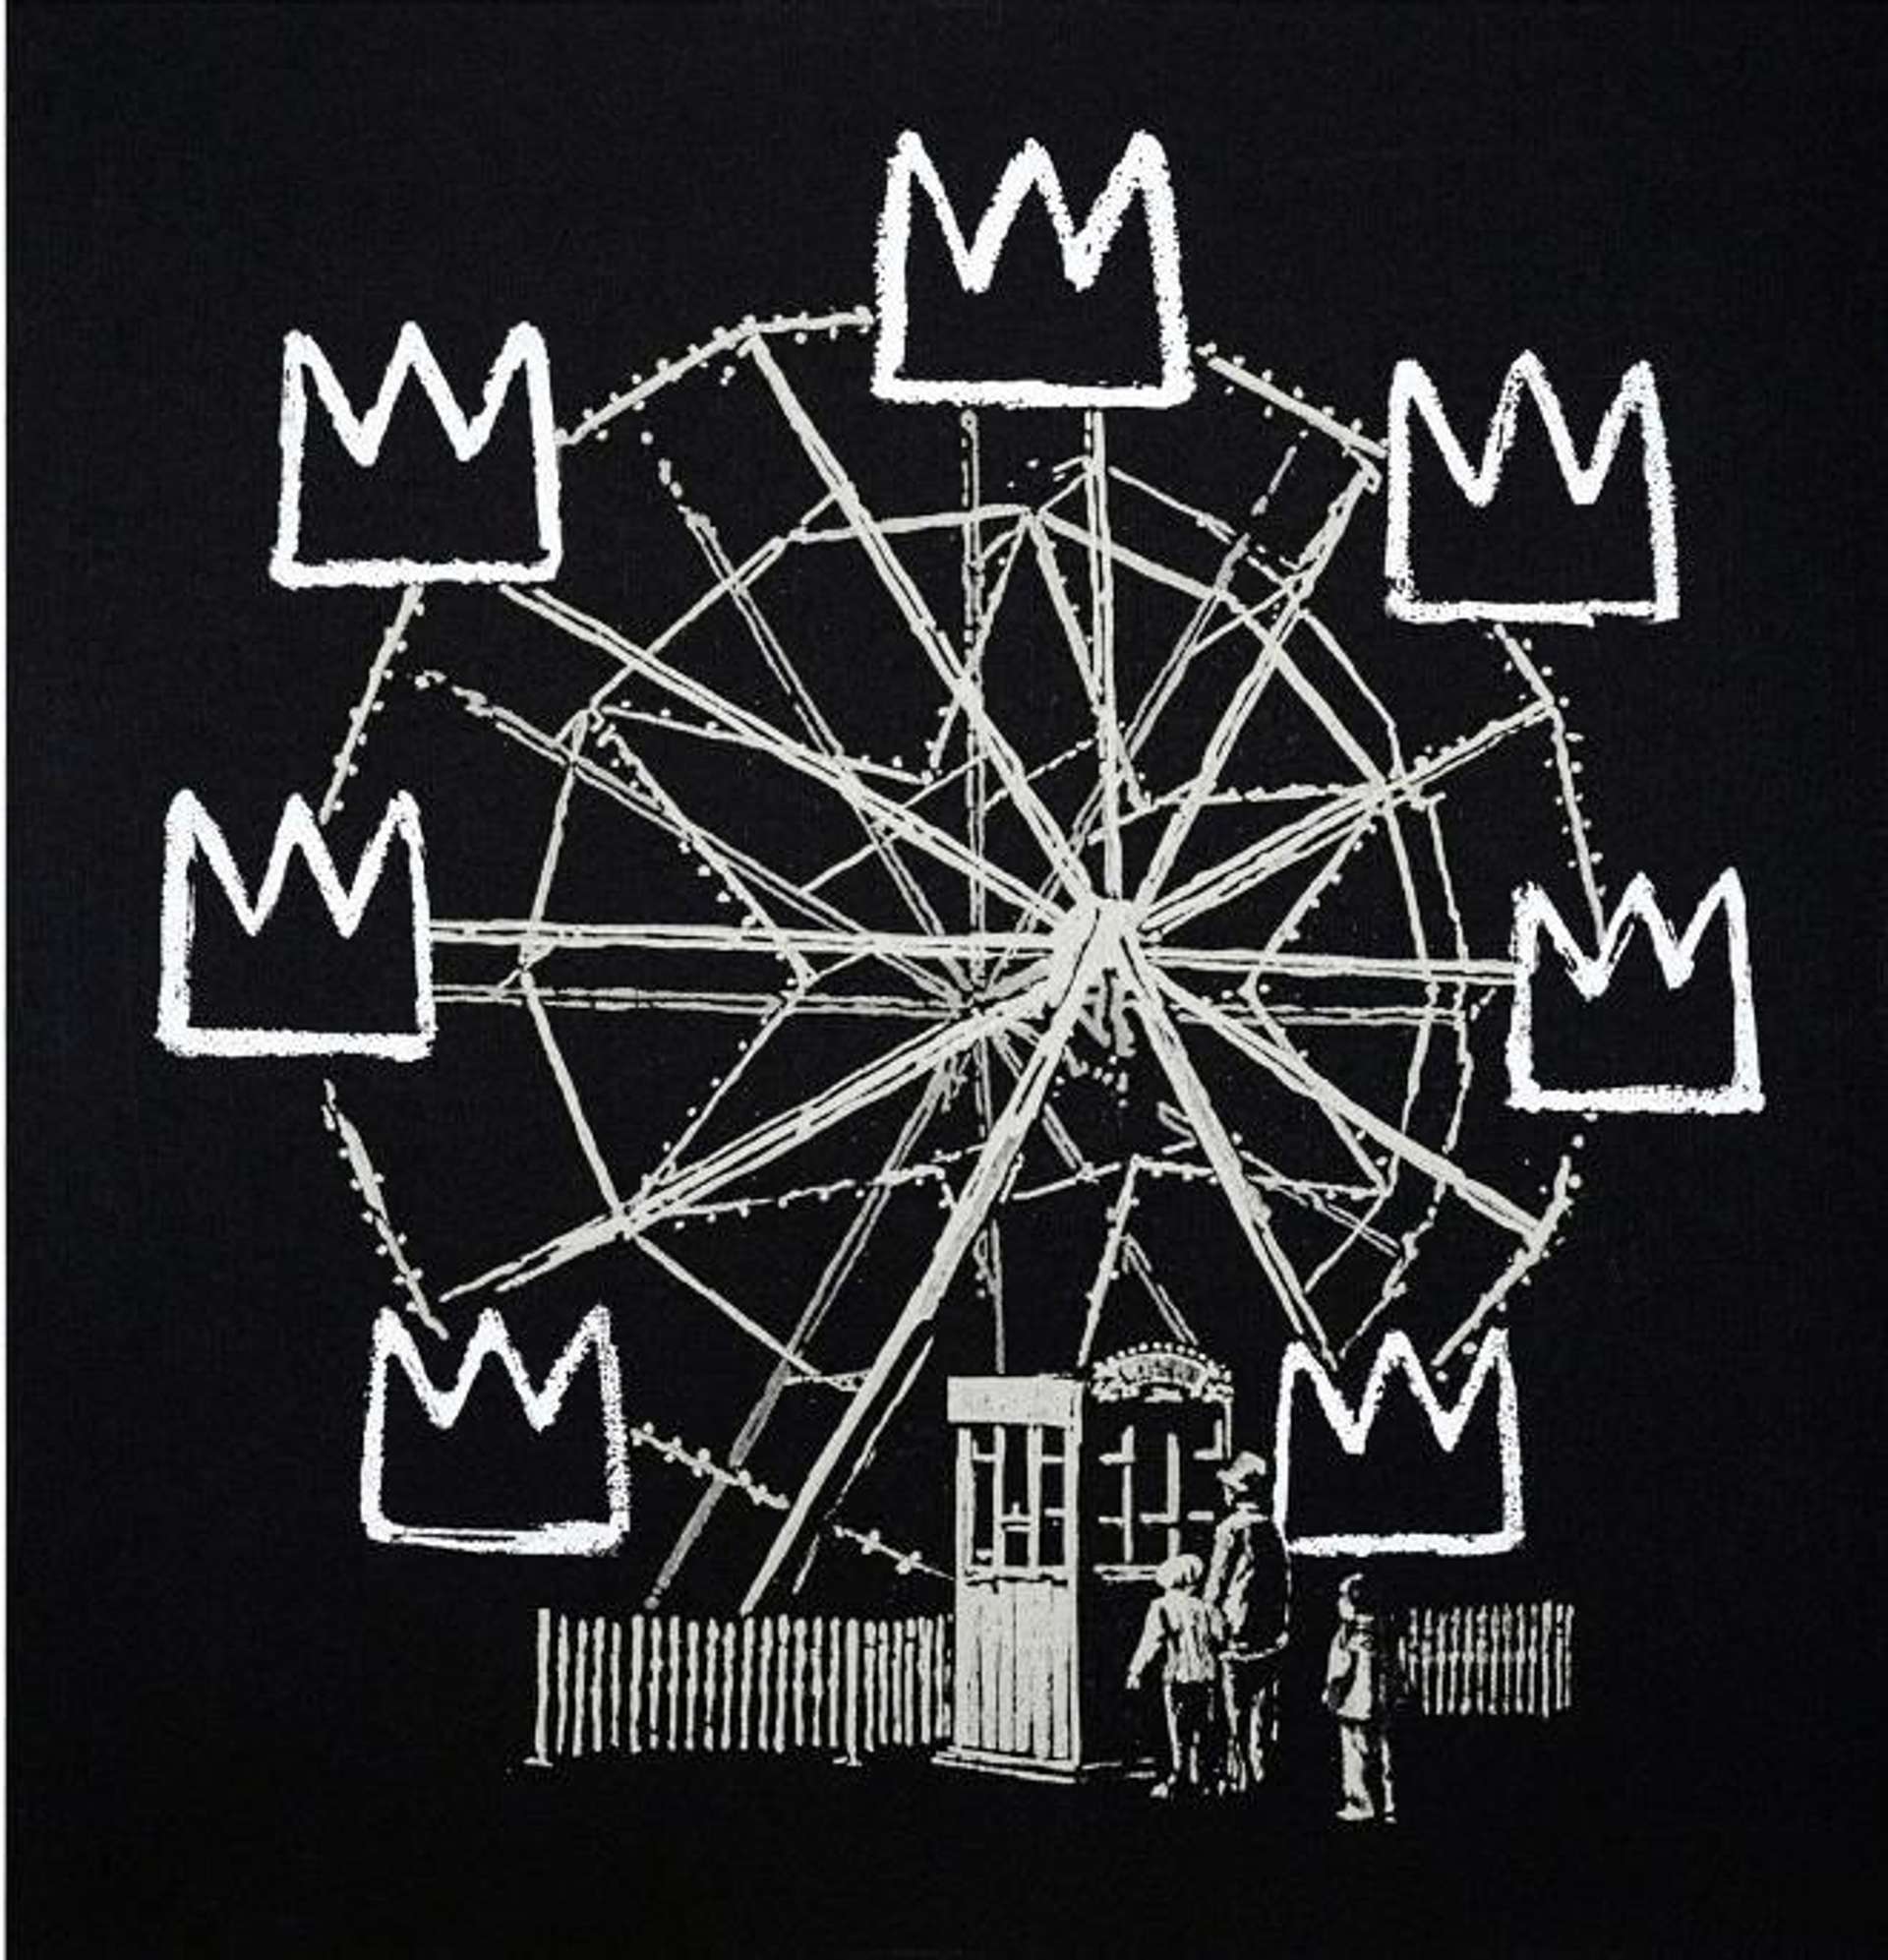 White graffiti style ferris wheel with crowns as the carriages on a black background